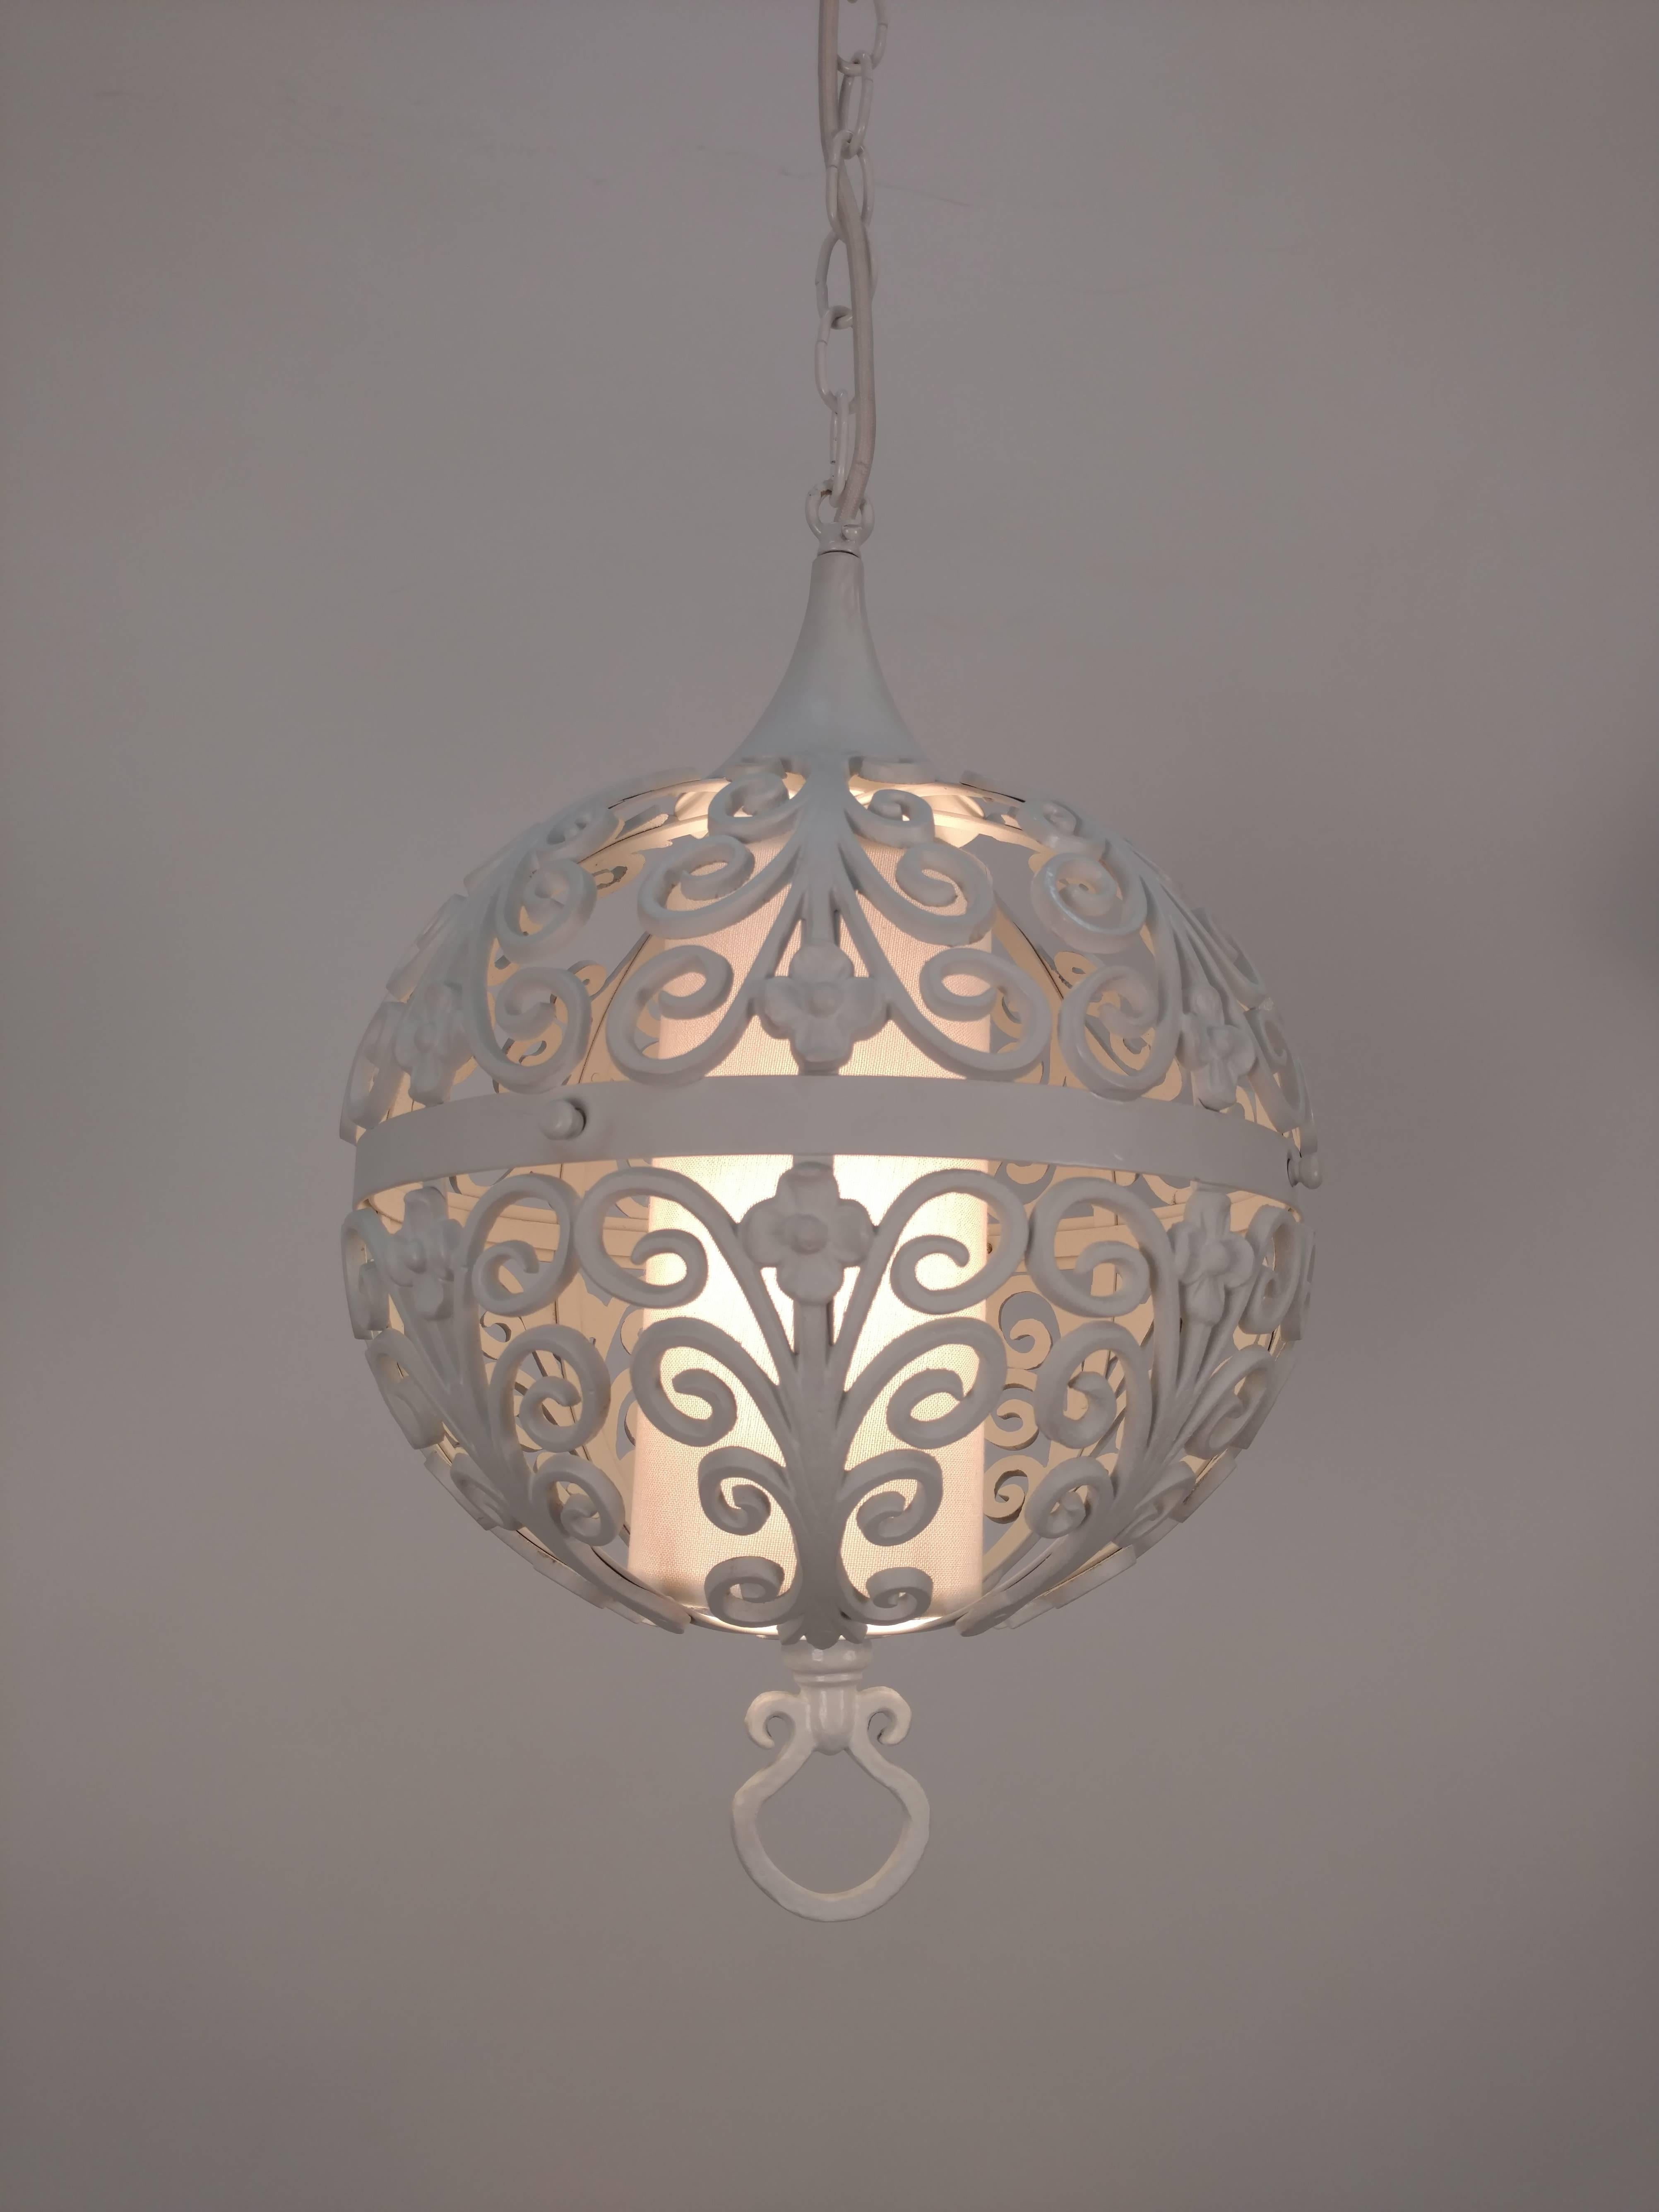 20th Century White Round Ornate Chandelier Pendant For Sale